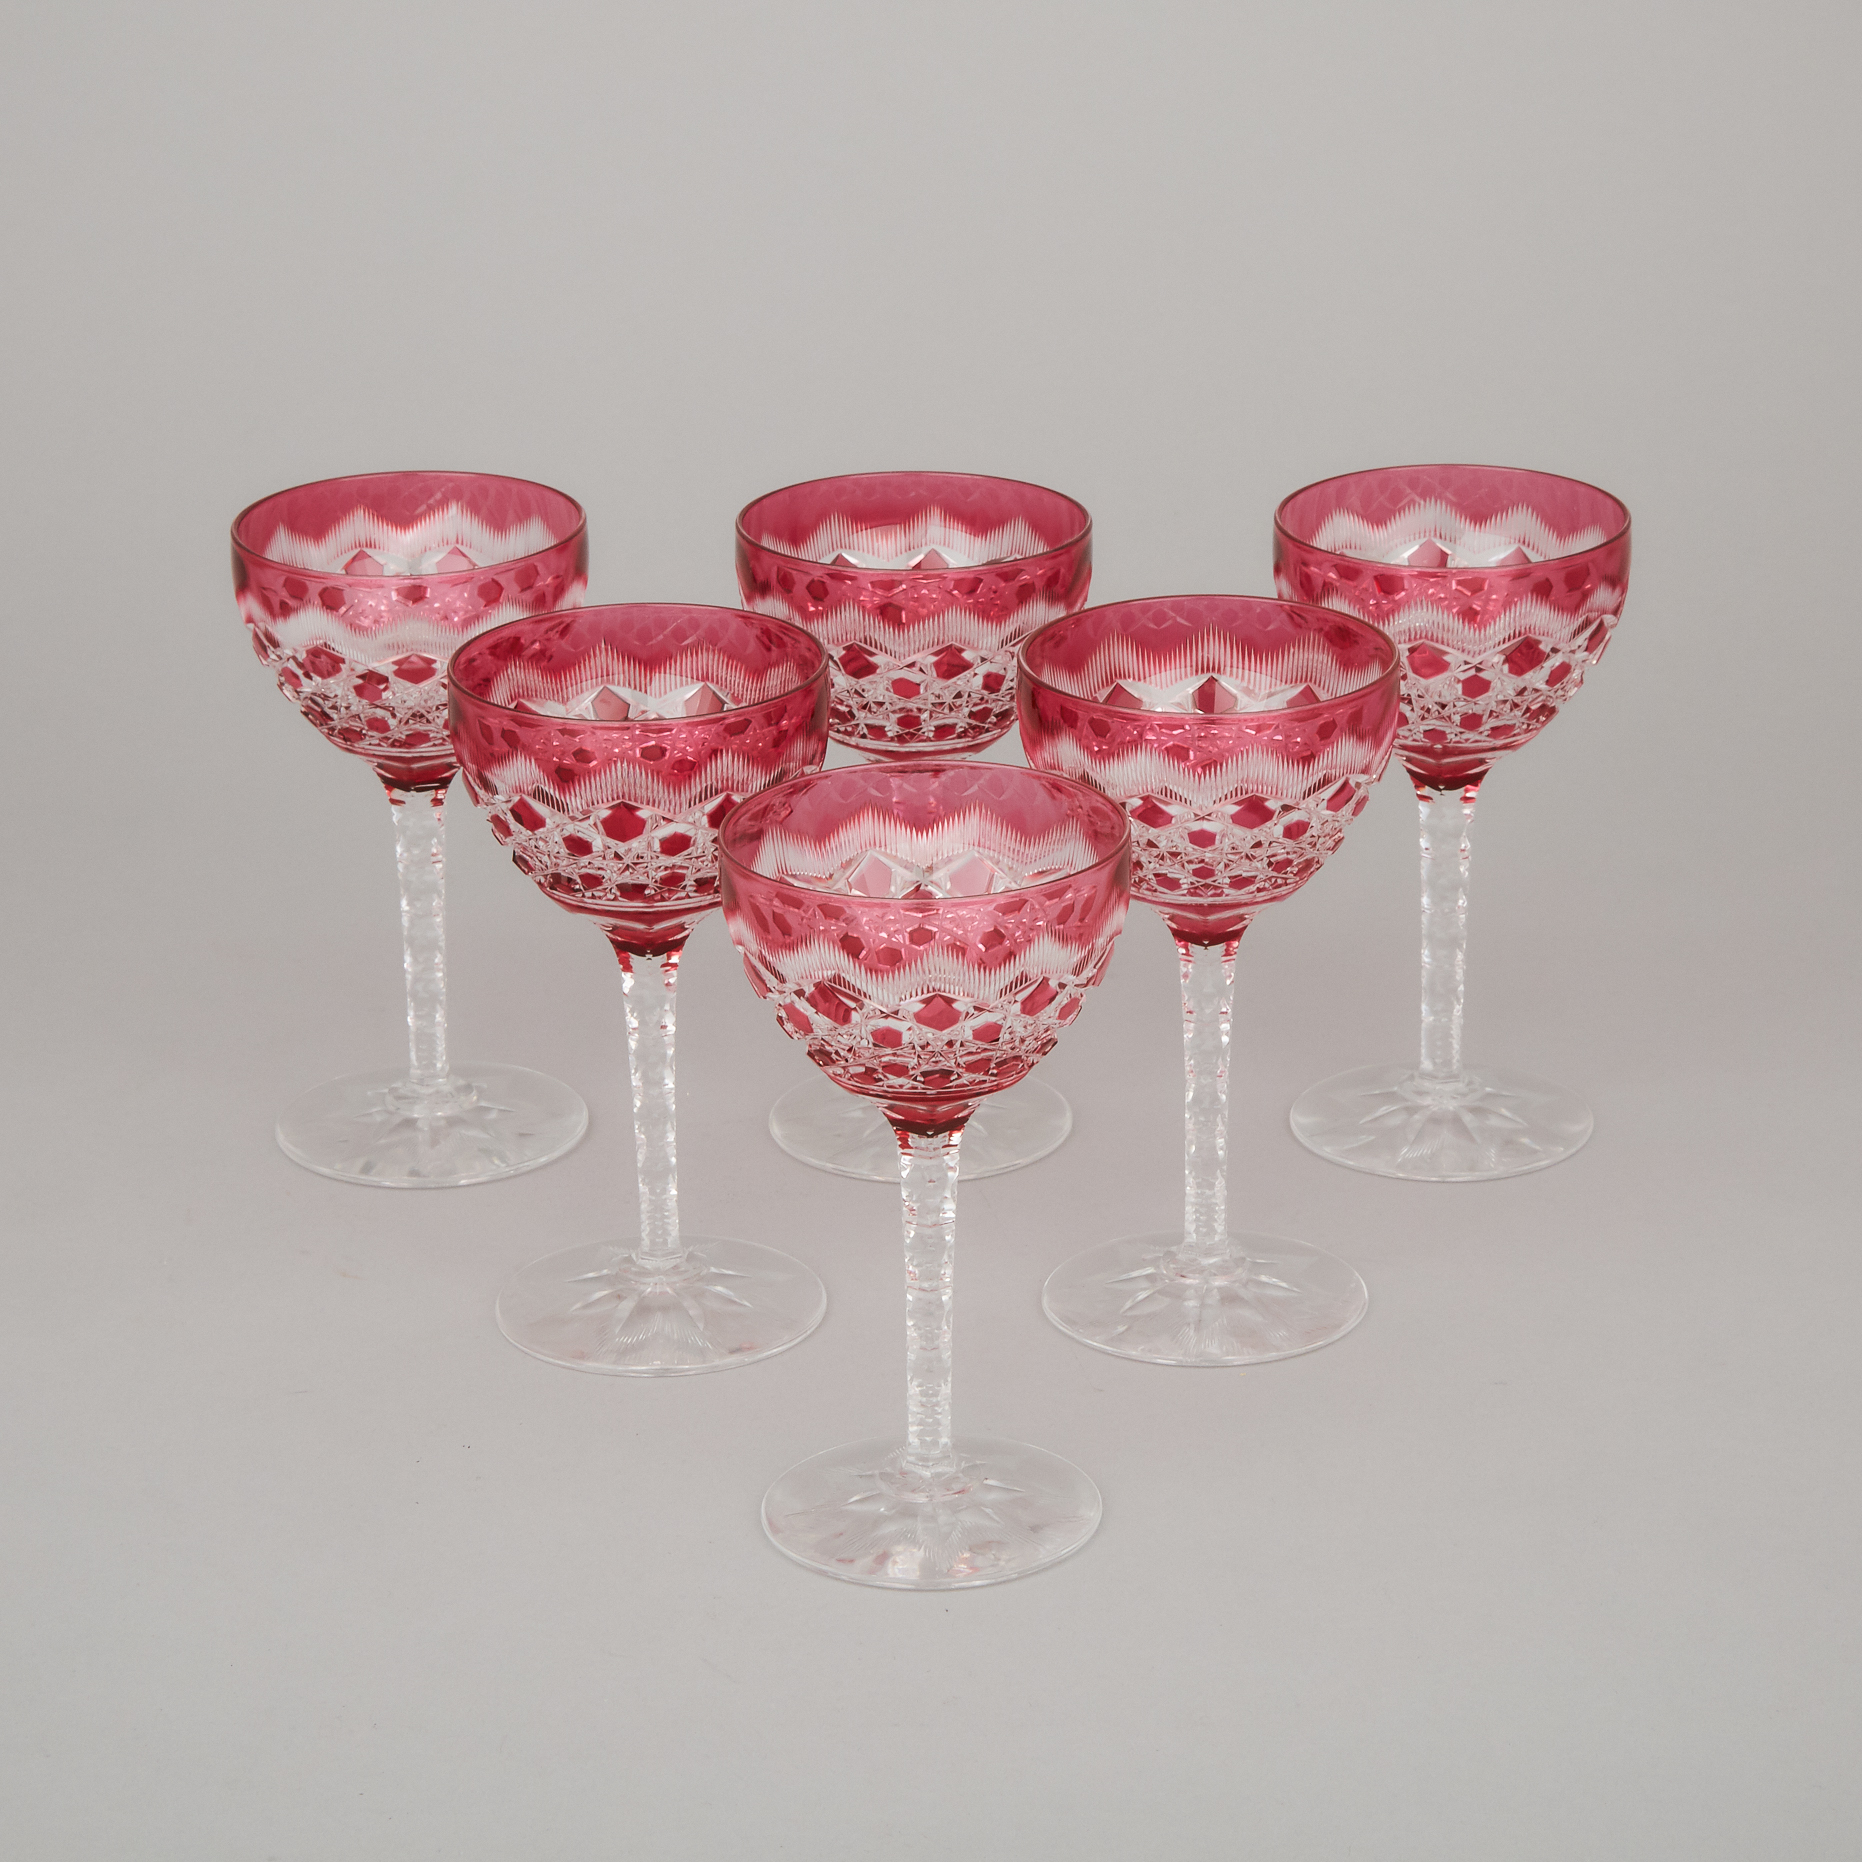 Six Bohemian Red Overlaid and Cut Glass Wine Glasses, early 20th century